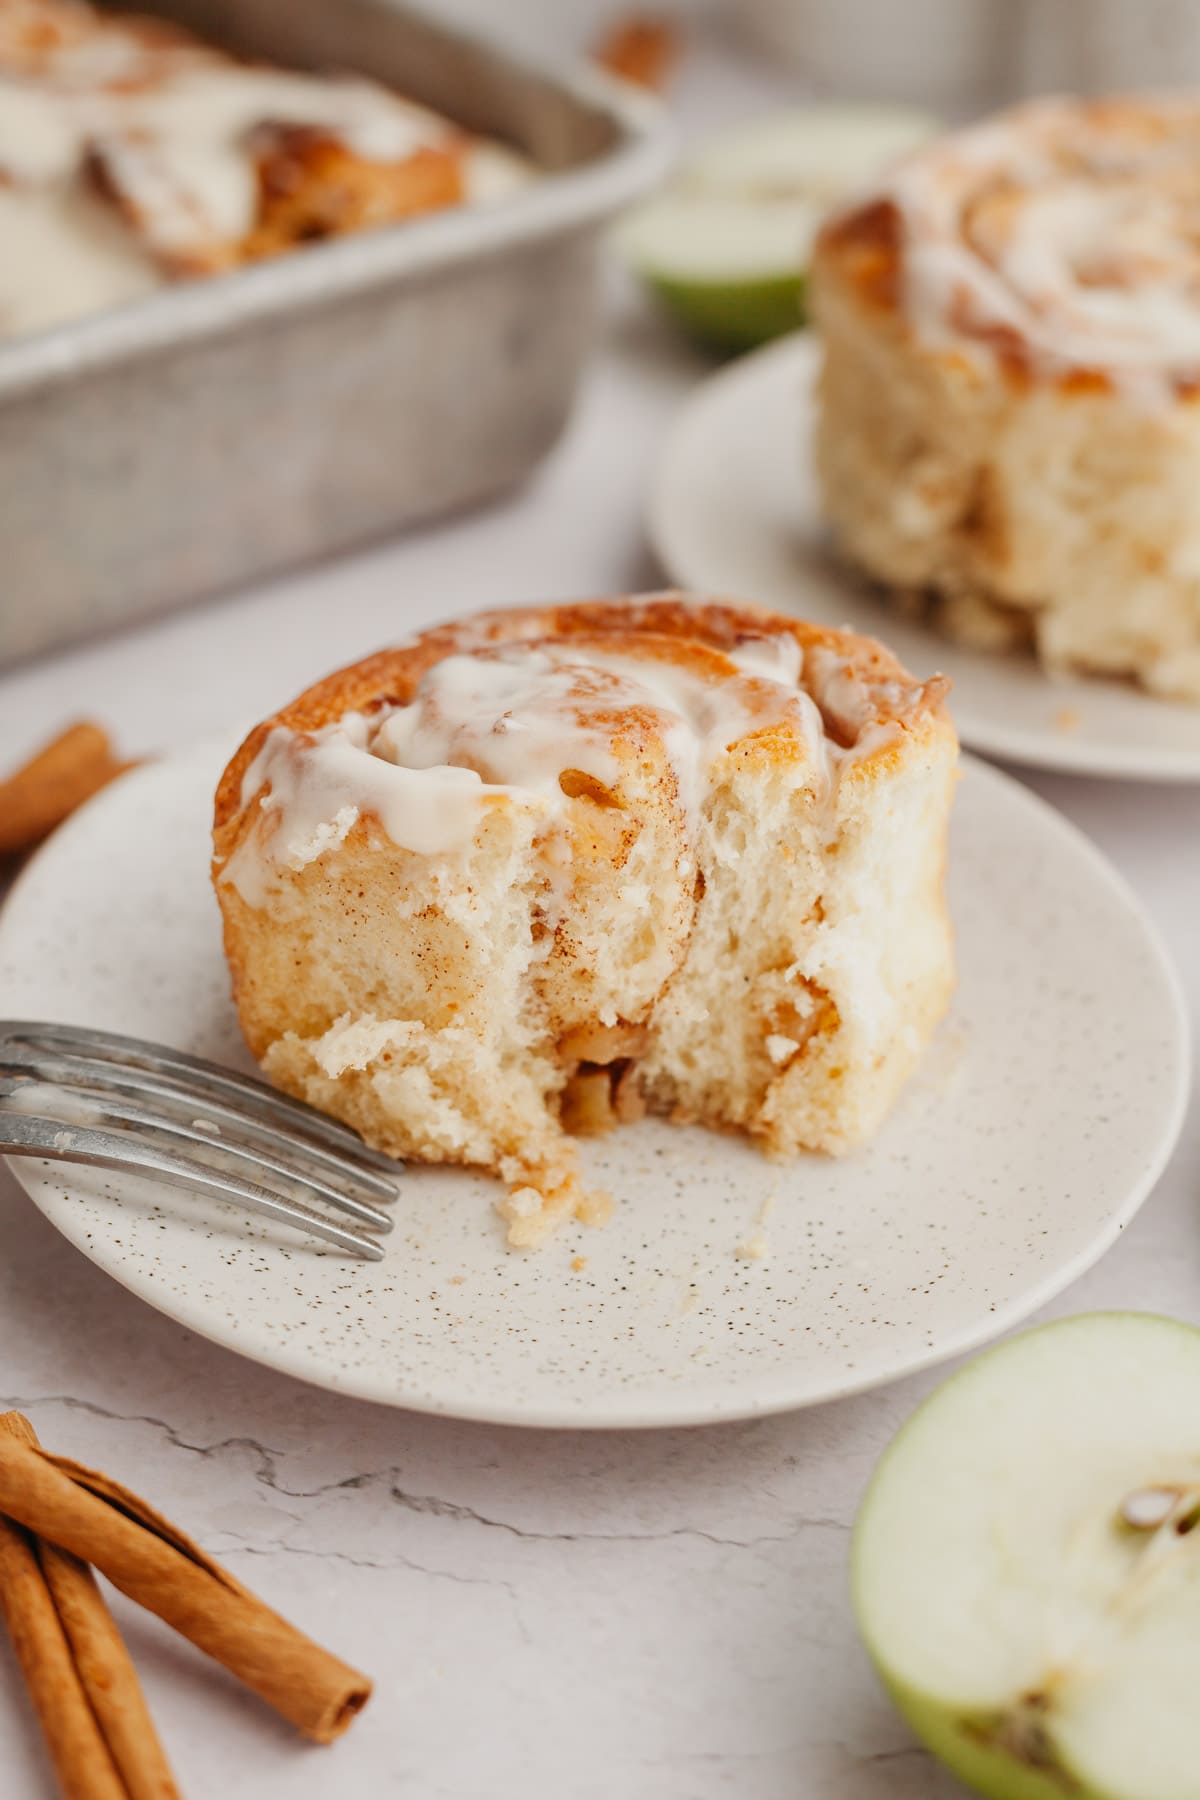 A cinnamon roll with apple pie filling on a small plate.